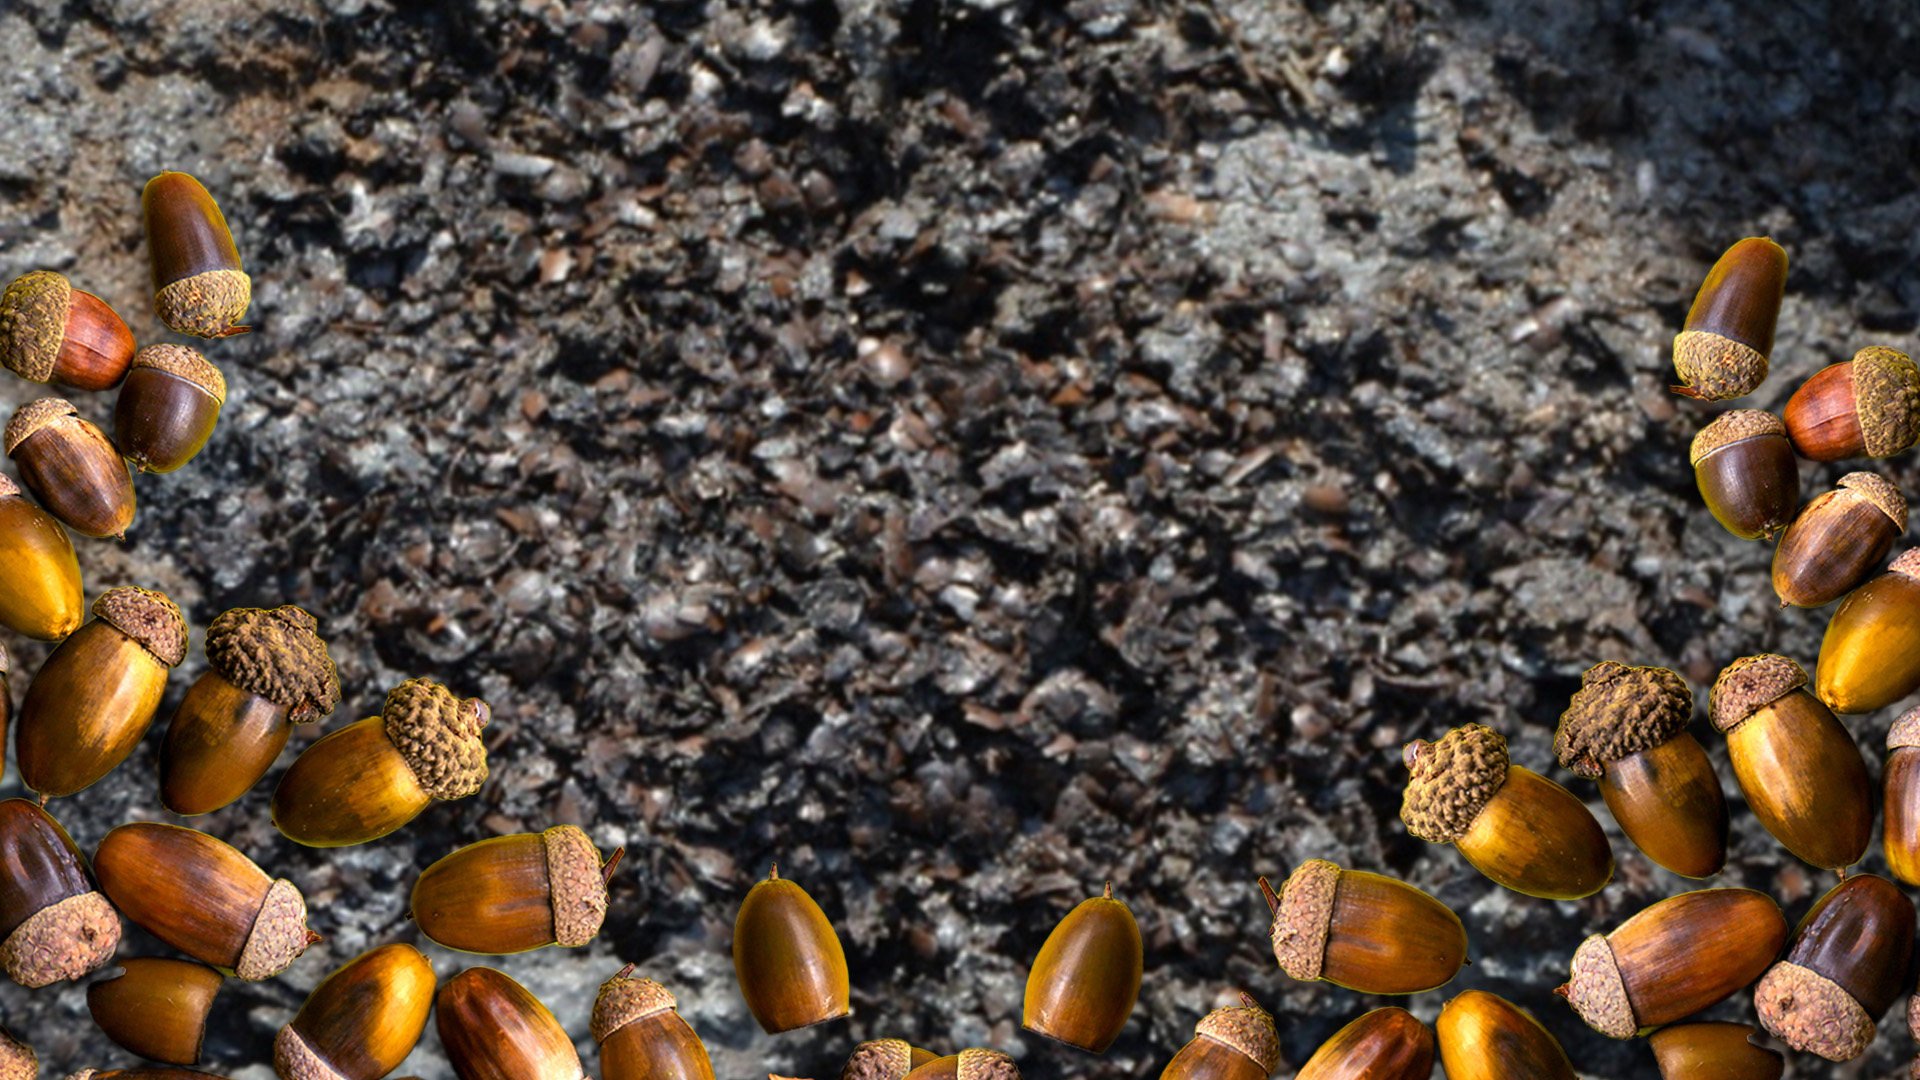 A large number of acorns were unearthed at the school site while there is increasing evidence that many early rice-farming communities in China heavily dependent on acorns. Photo: SCMP composite/Shutterstock/Global Times